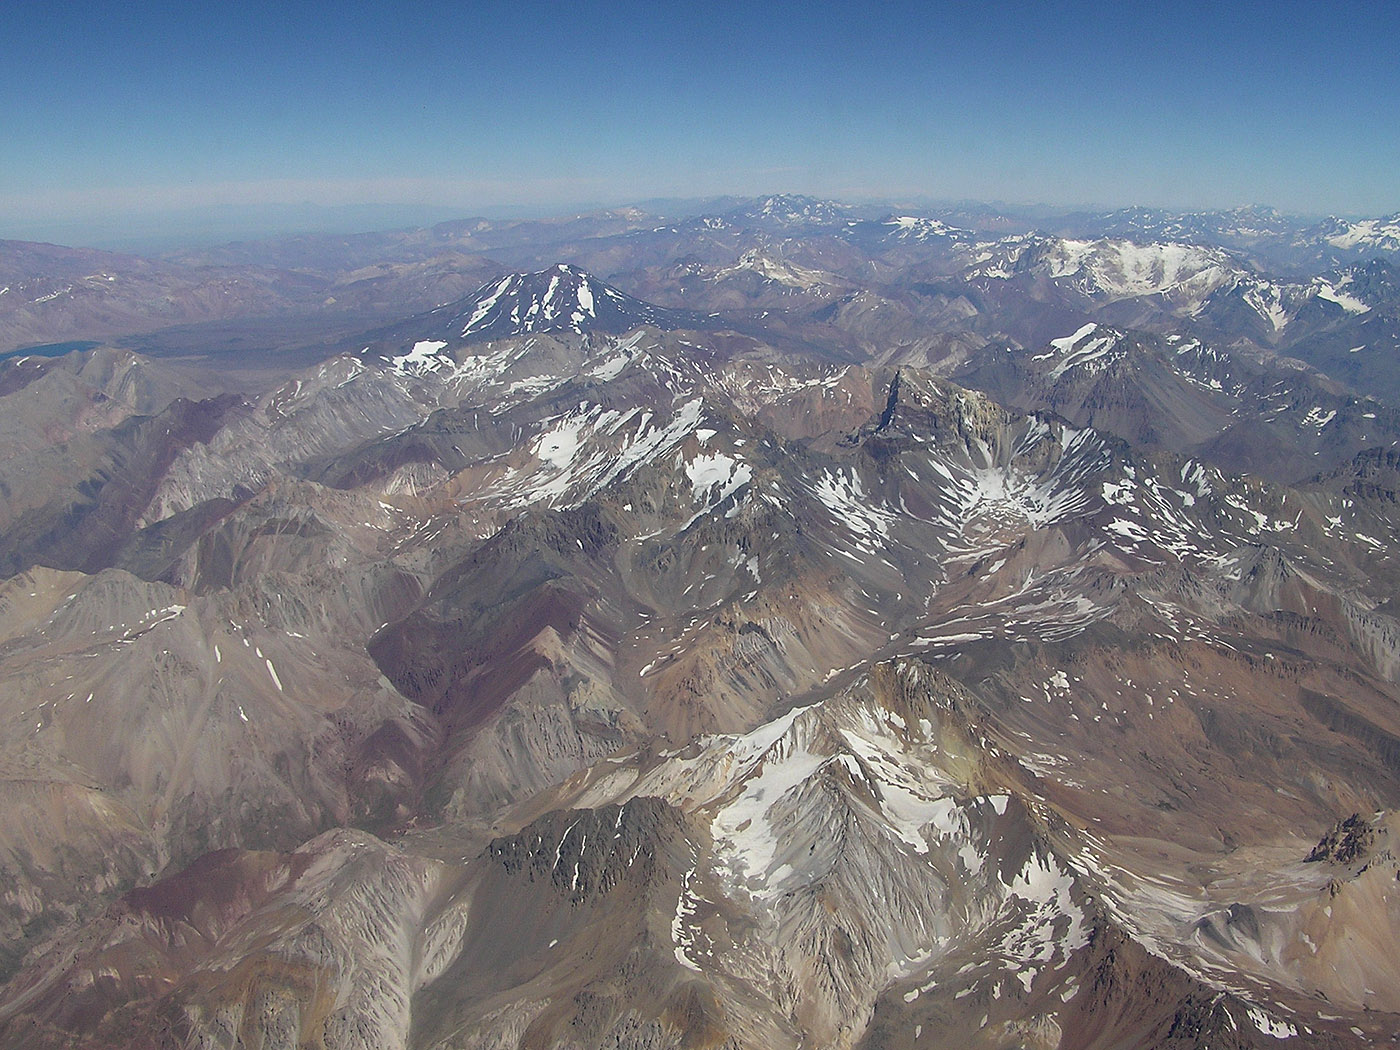 Andes near Santiago, Chile